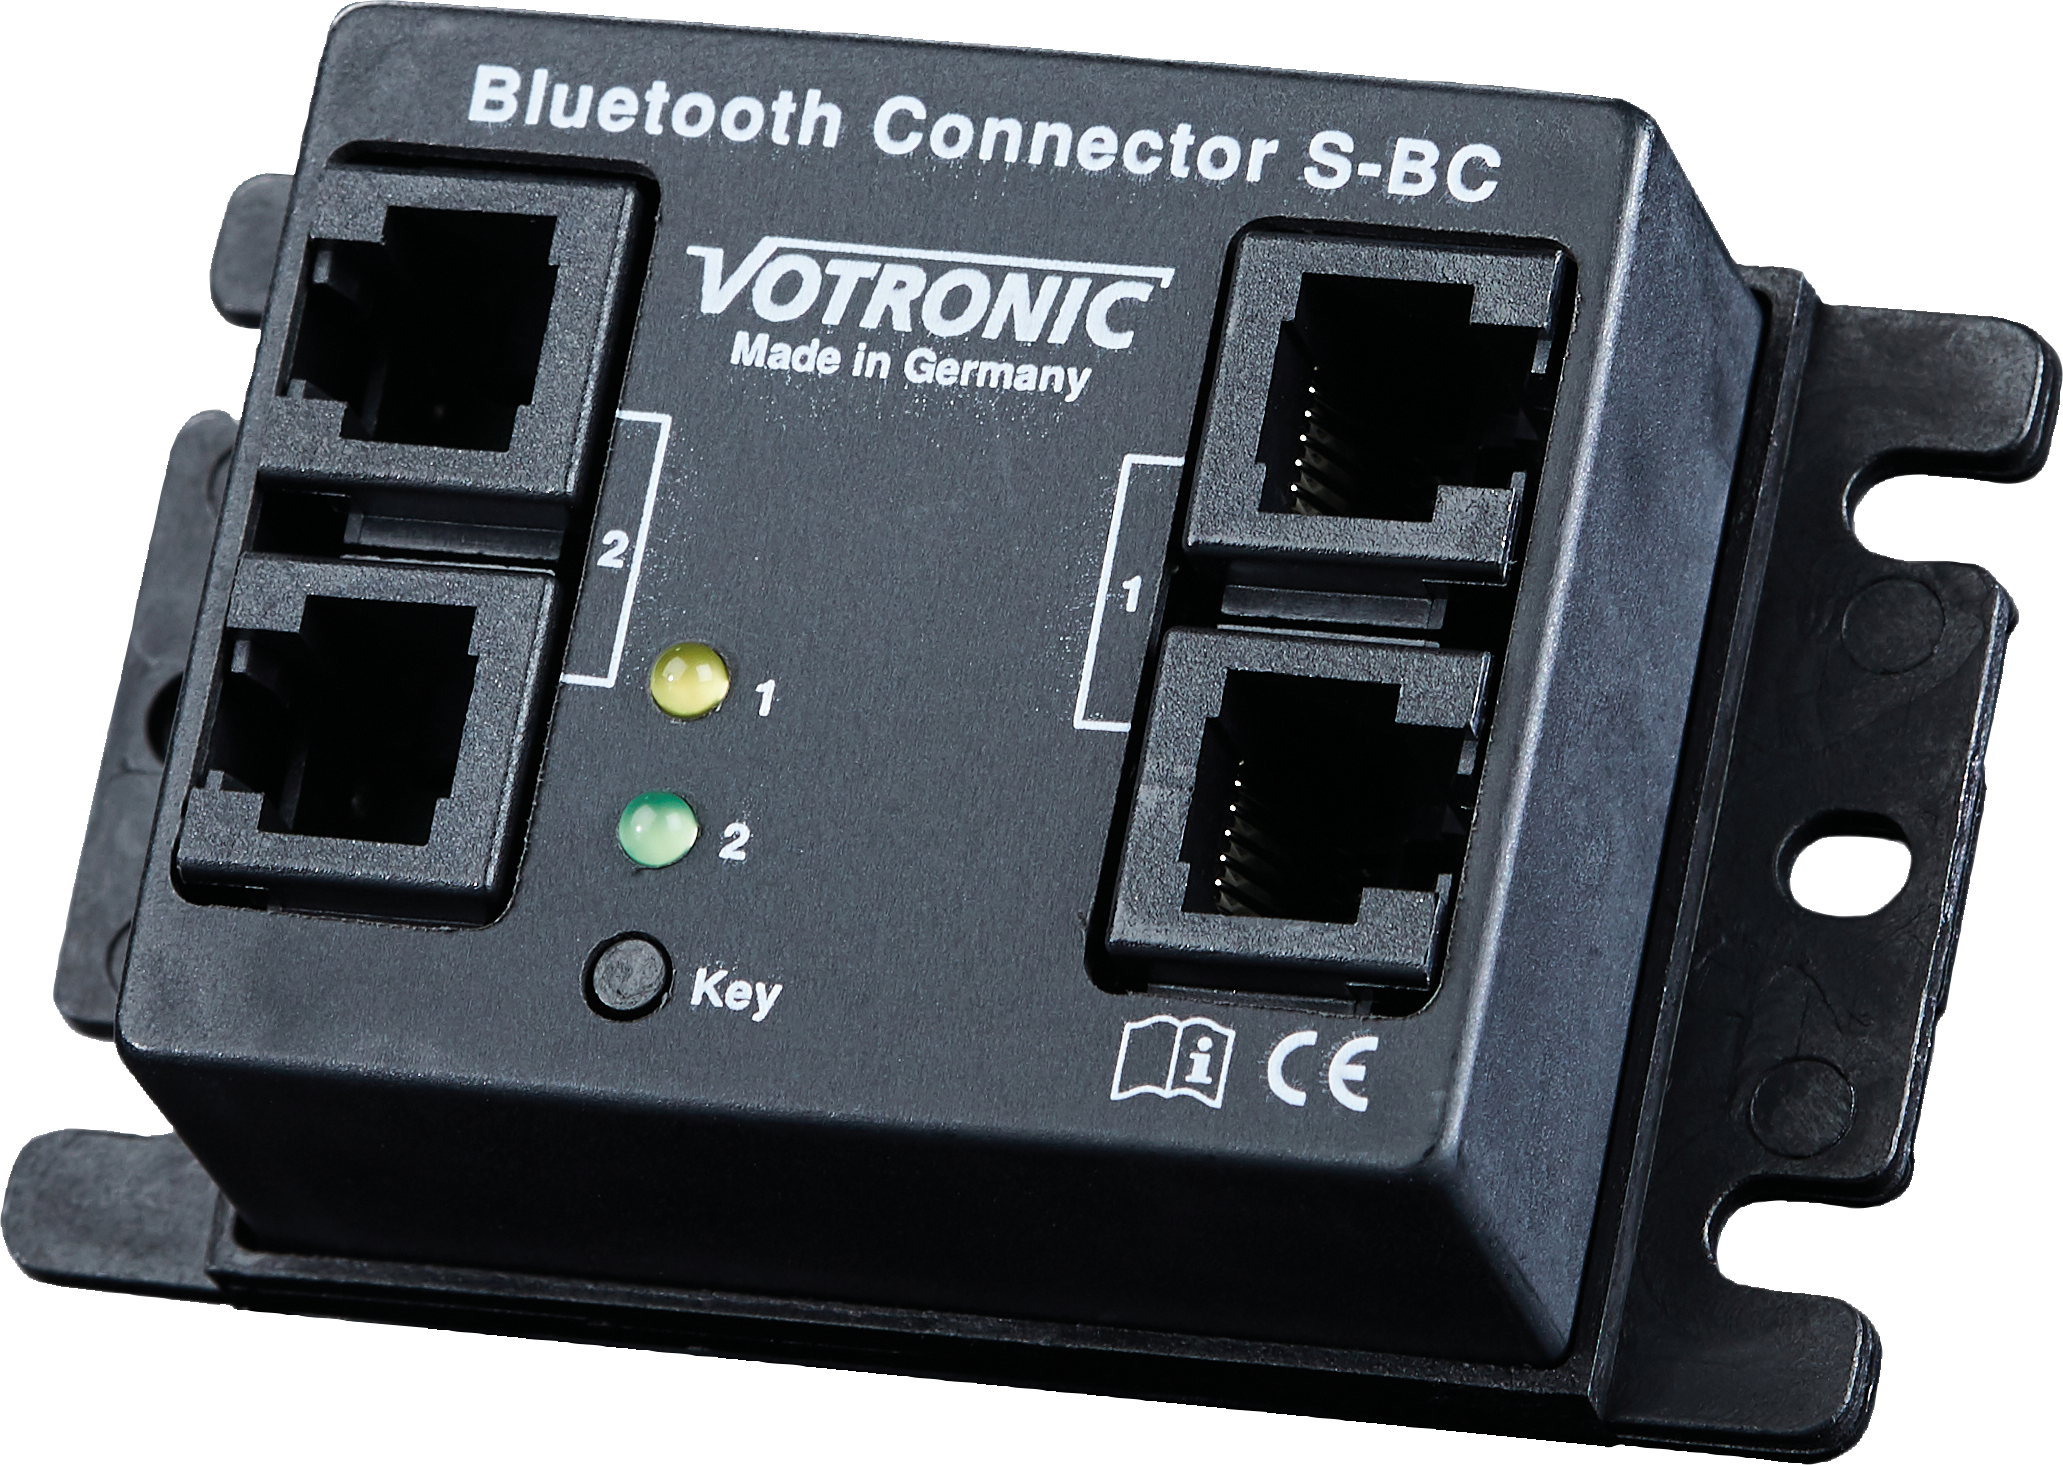 Votronic 1430 Bluetooth Connector S-BC inkl. Energy Monitor App